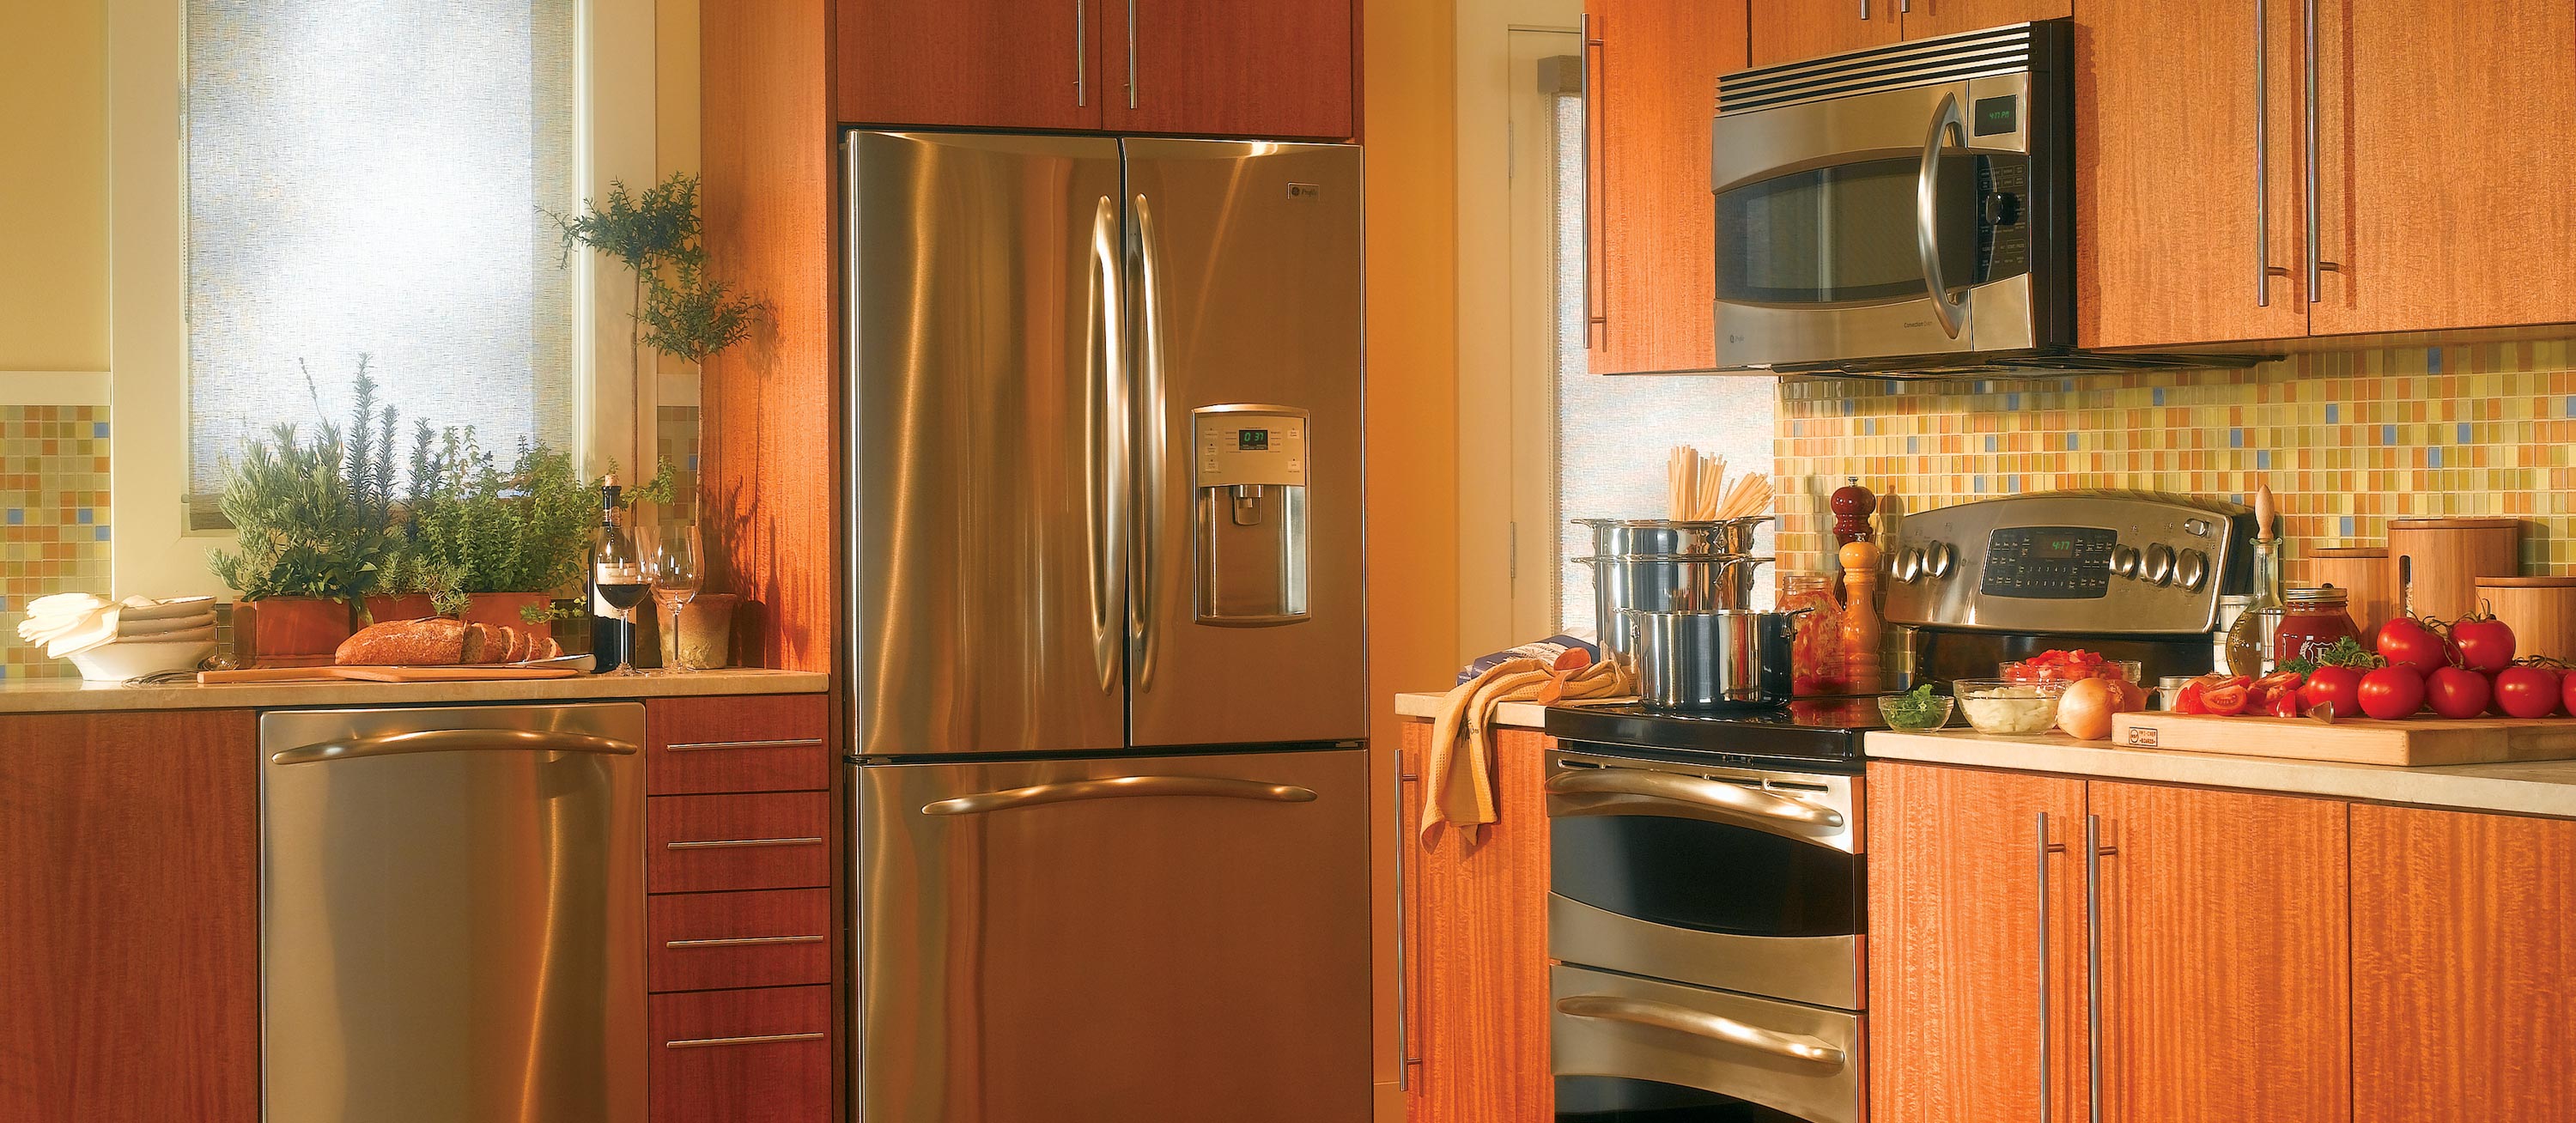 appliances for small kitchen spaces photo - 1